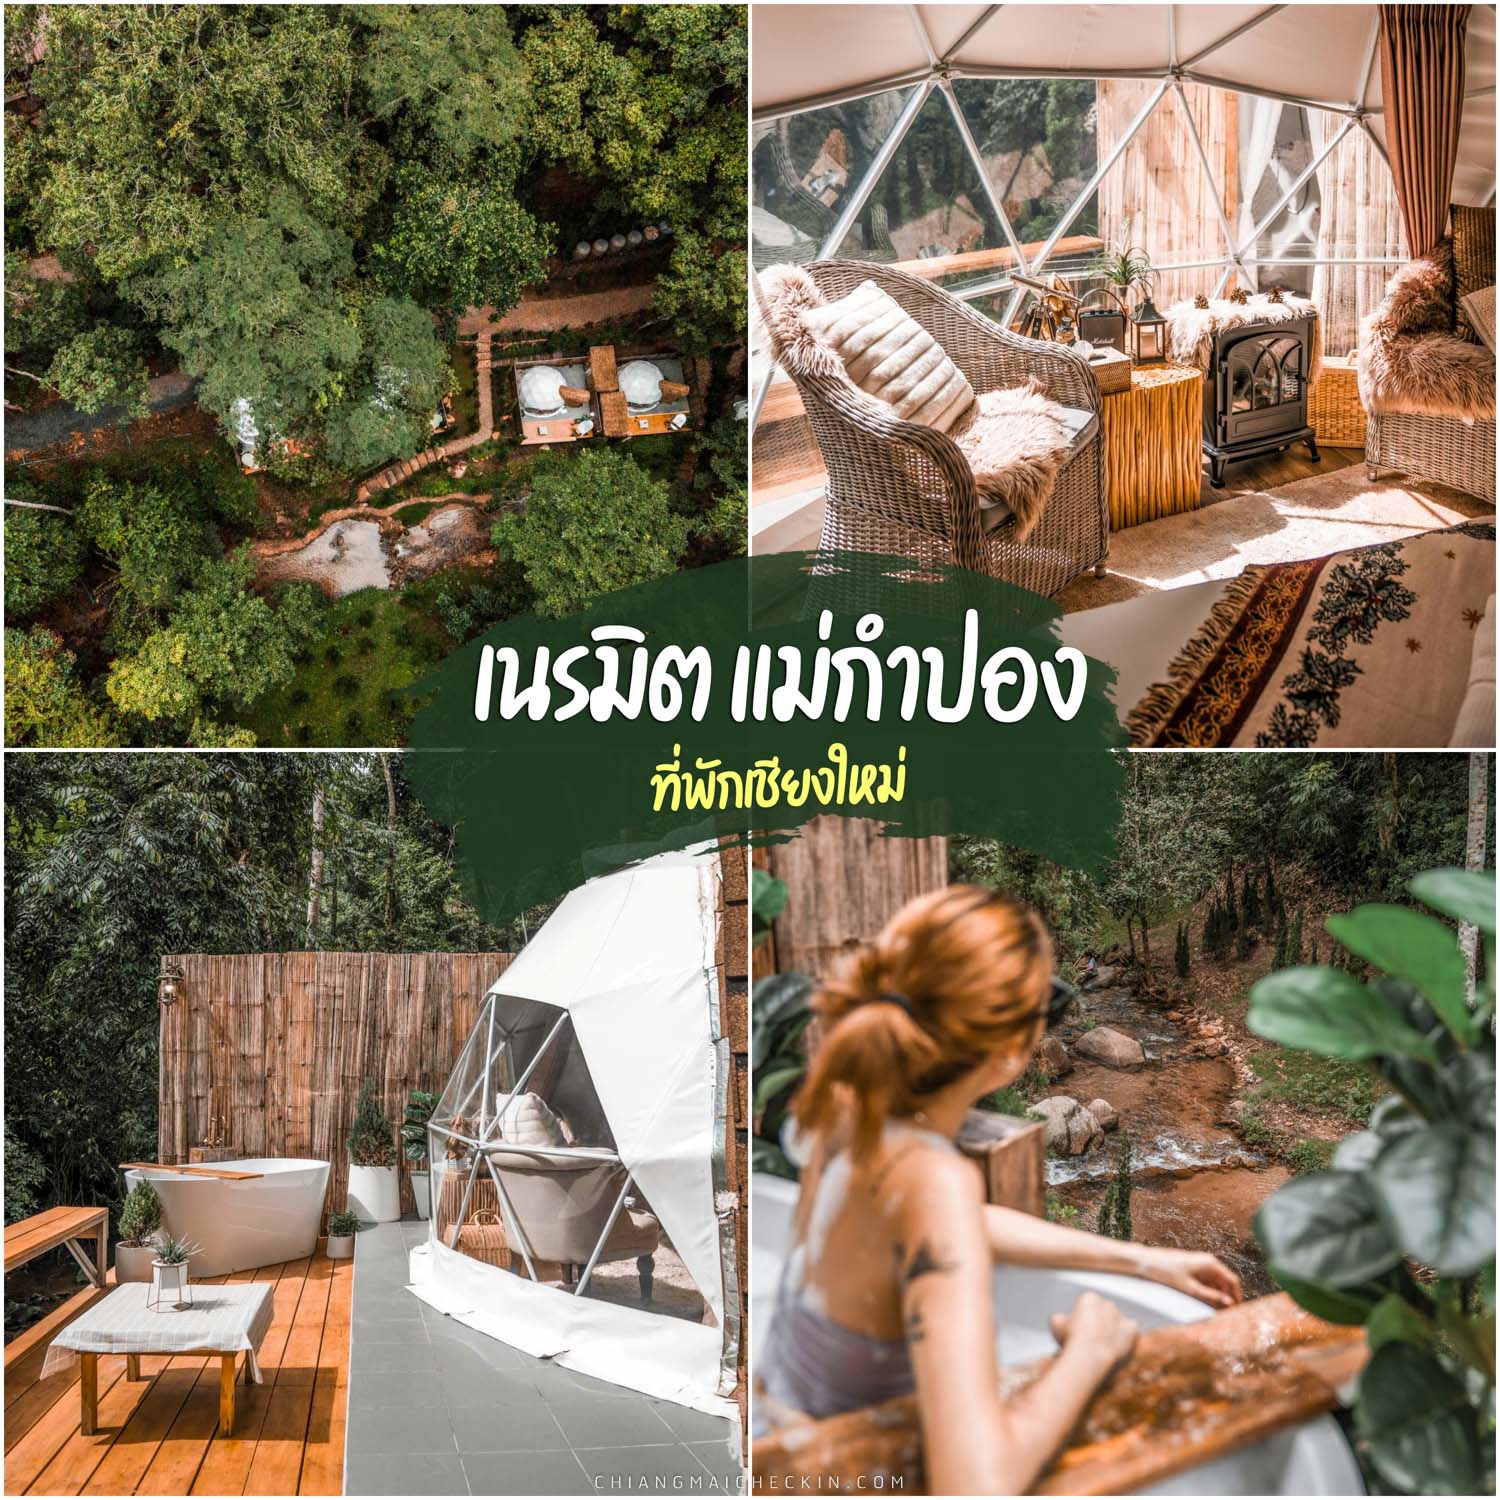 Create Mae Kampong, a place to stay in Chiang Mai, extremely beautiful, beautiful nature, like flying to a foreign country, very luxurious.